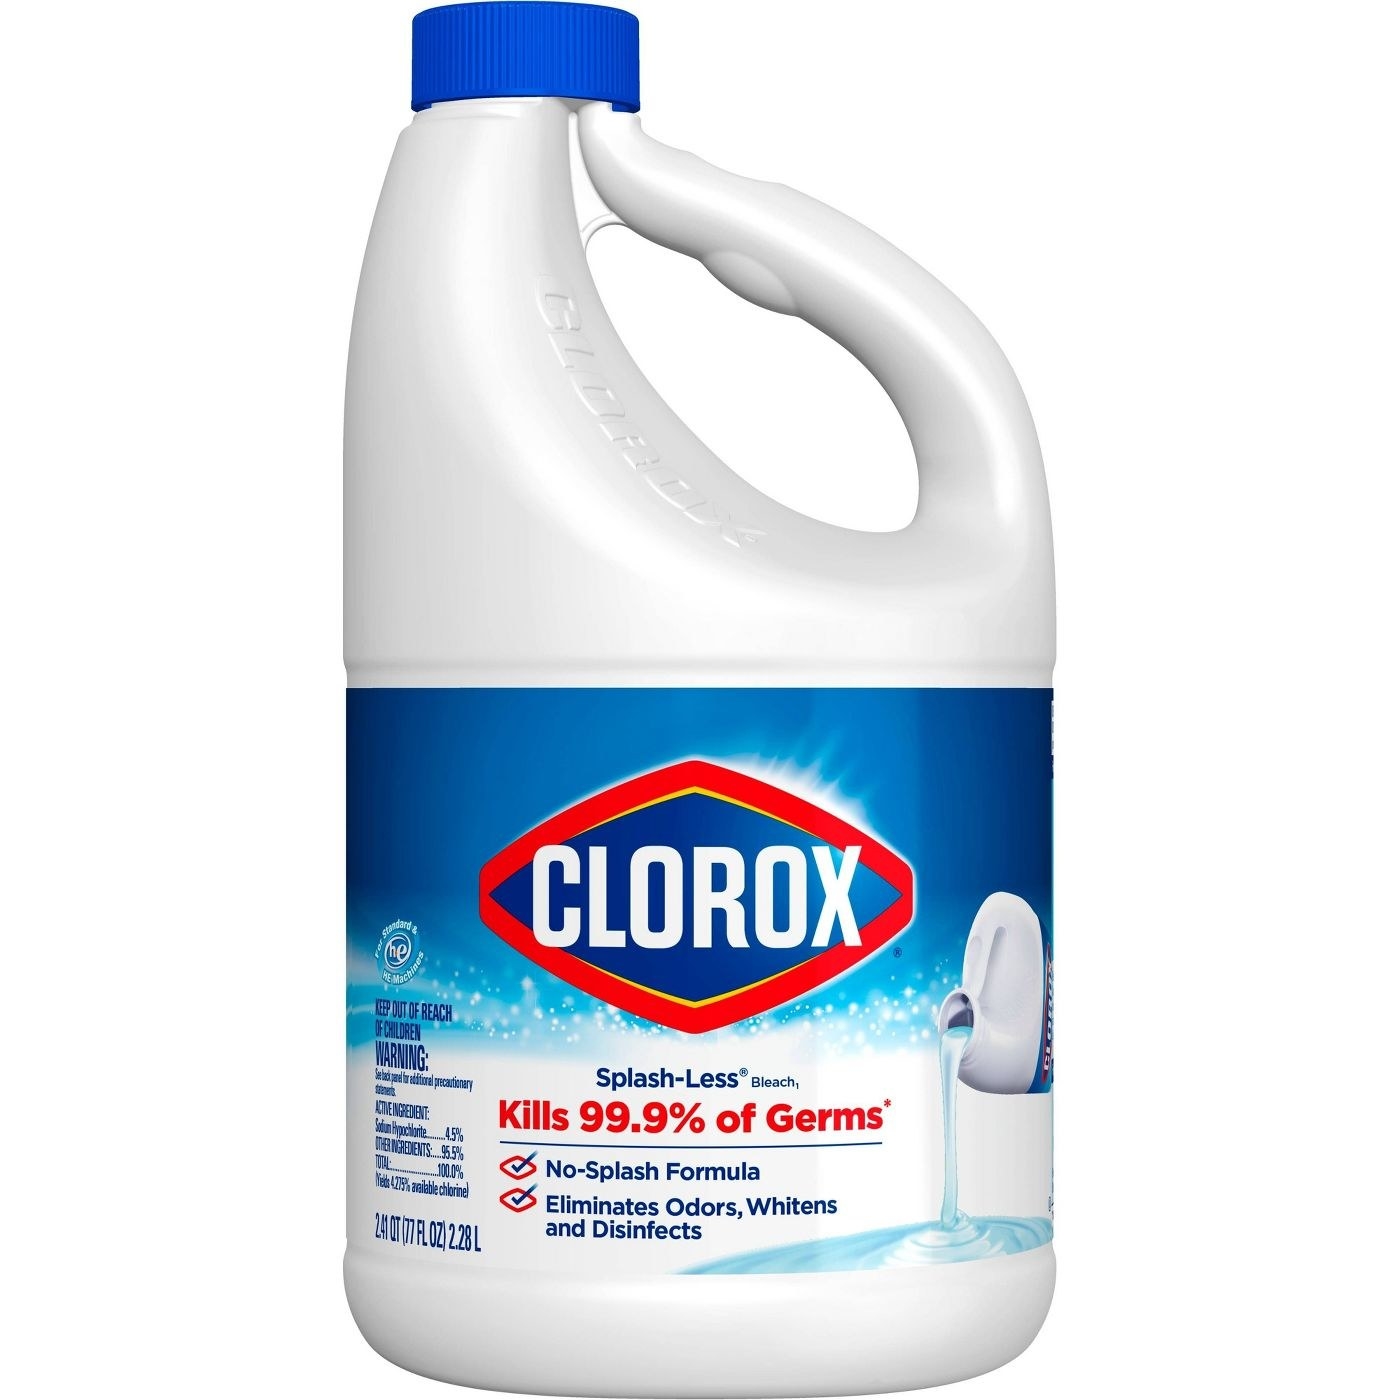 the container of clorox bleach 